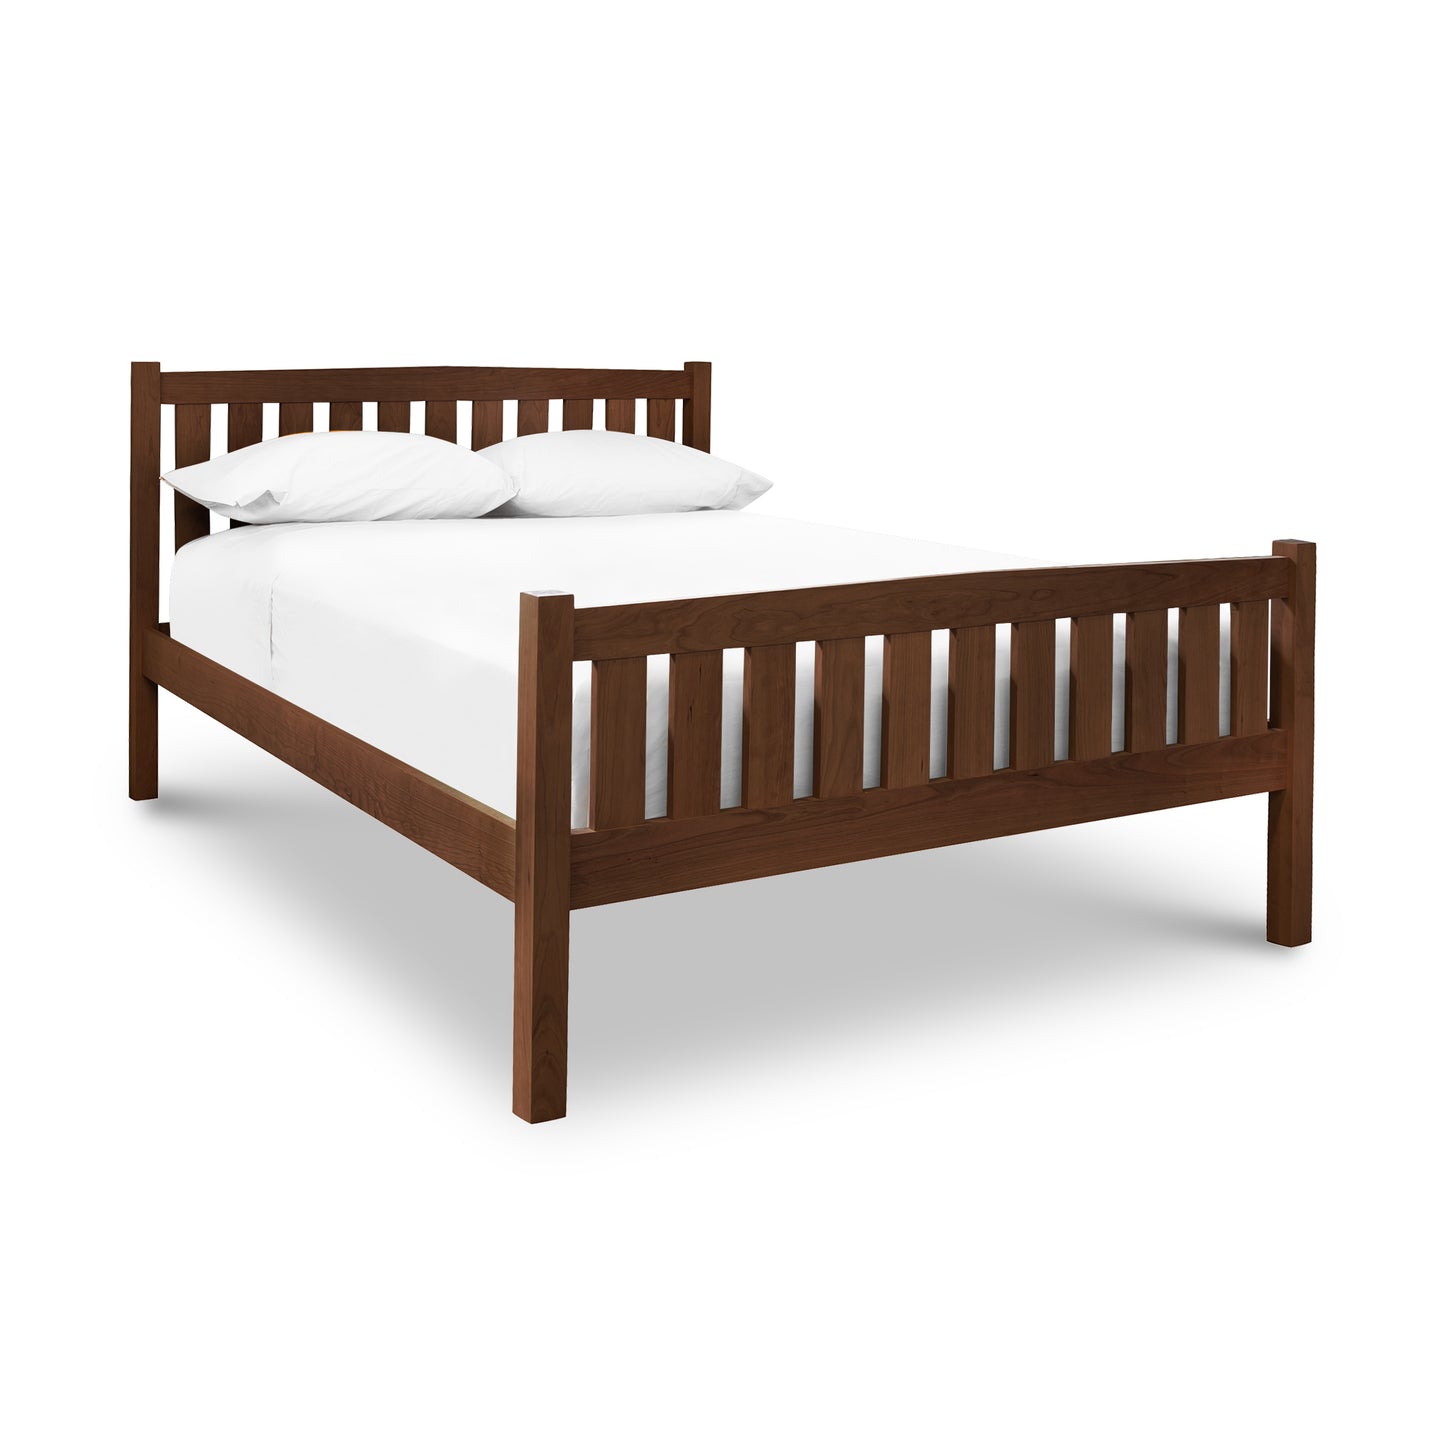 A Bennington Bed with High Footboard from Vermont Furniture Designs, featuring a simple design in walnut wood, two white pillows, and a white bed sheet, isolated on a white background.